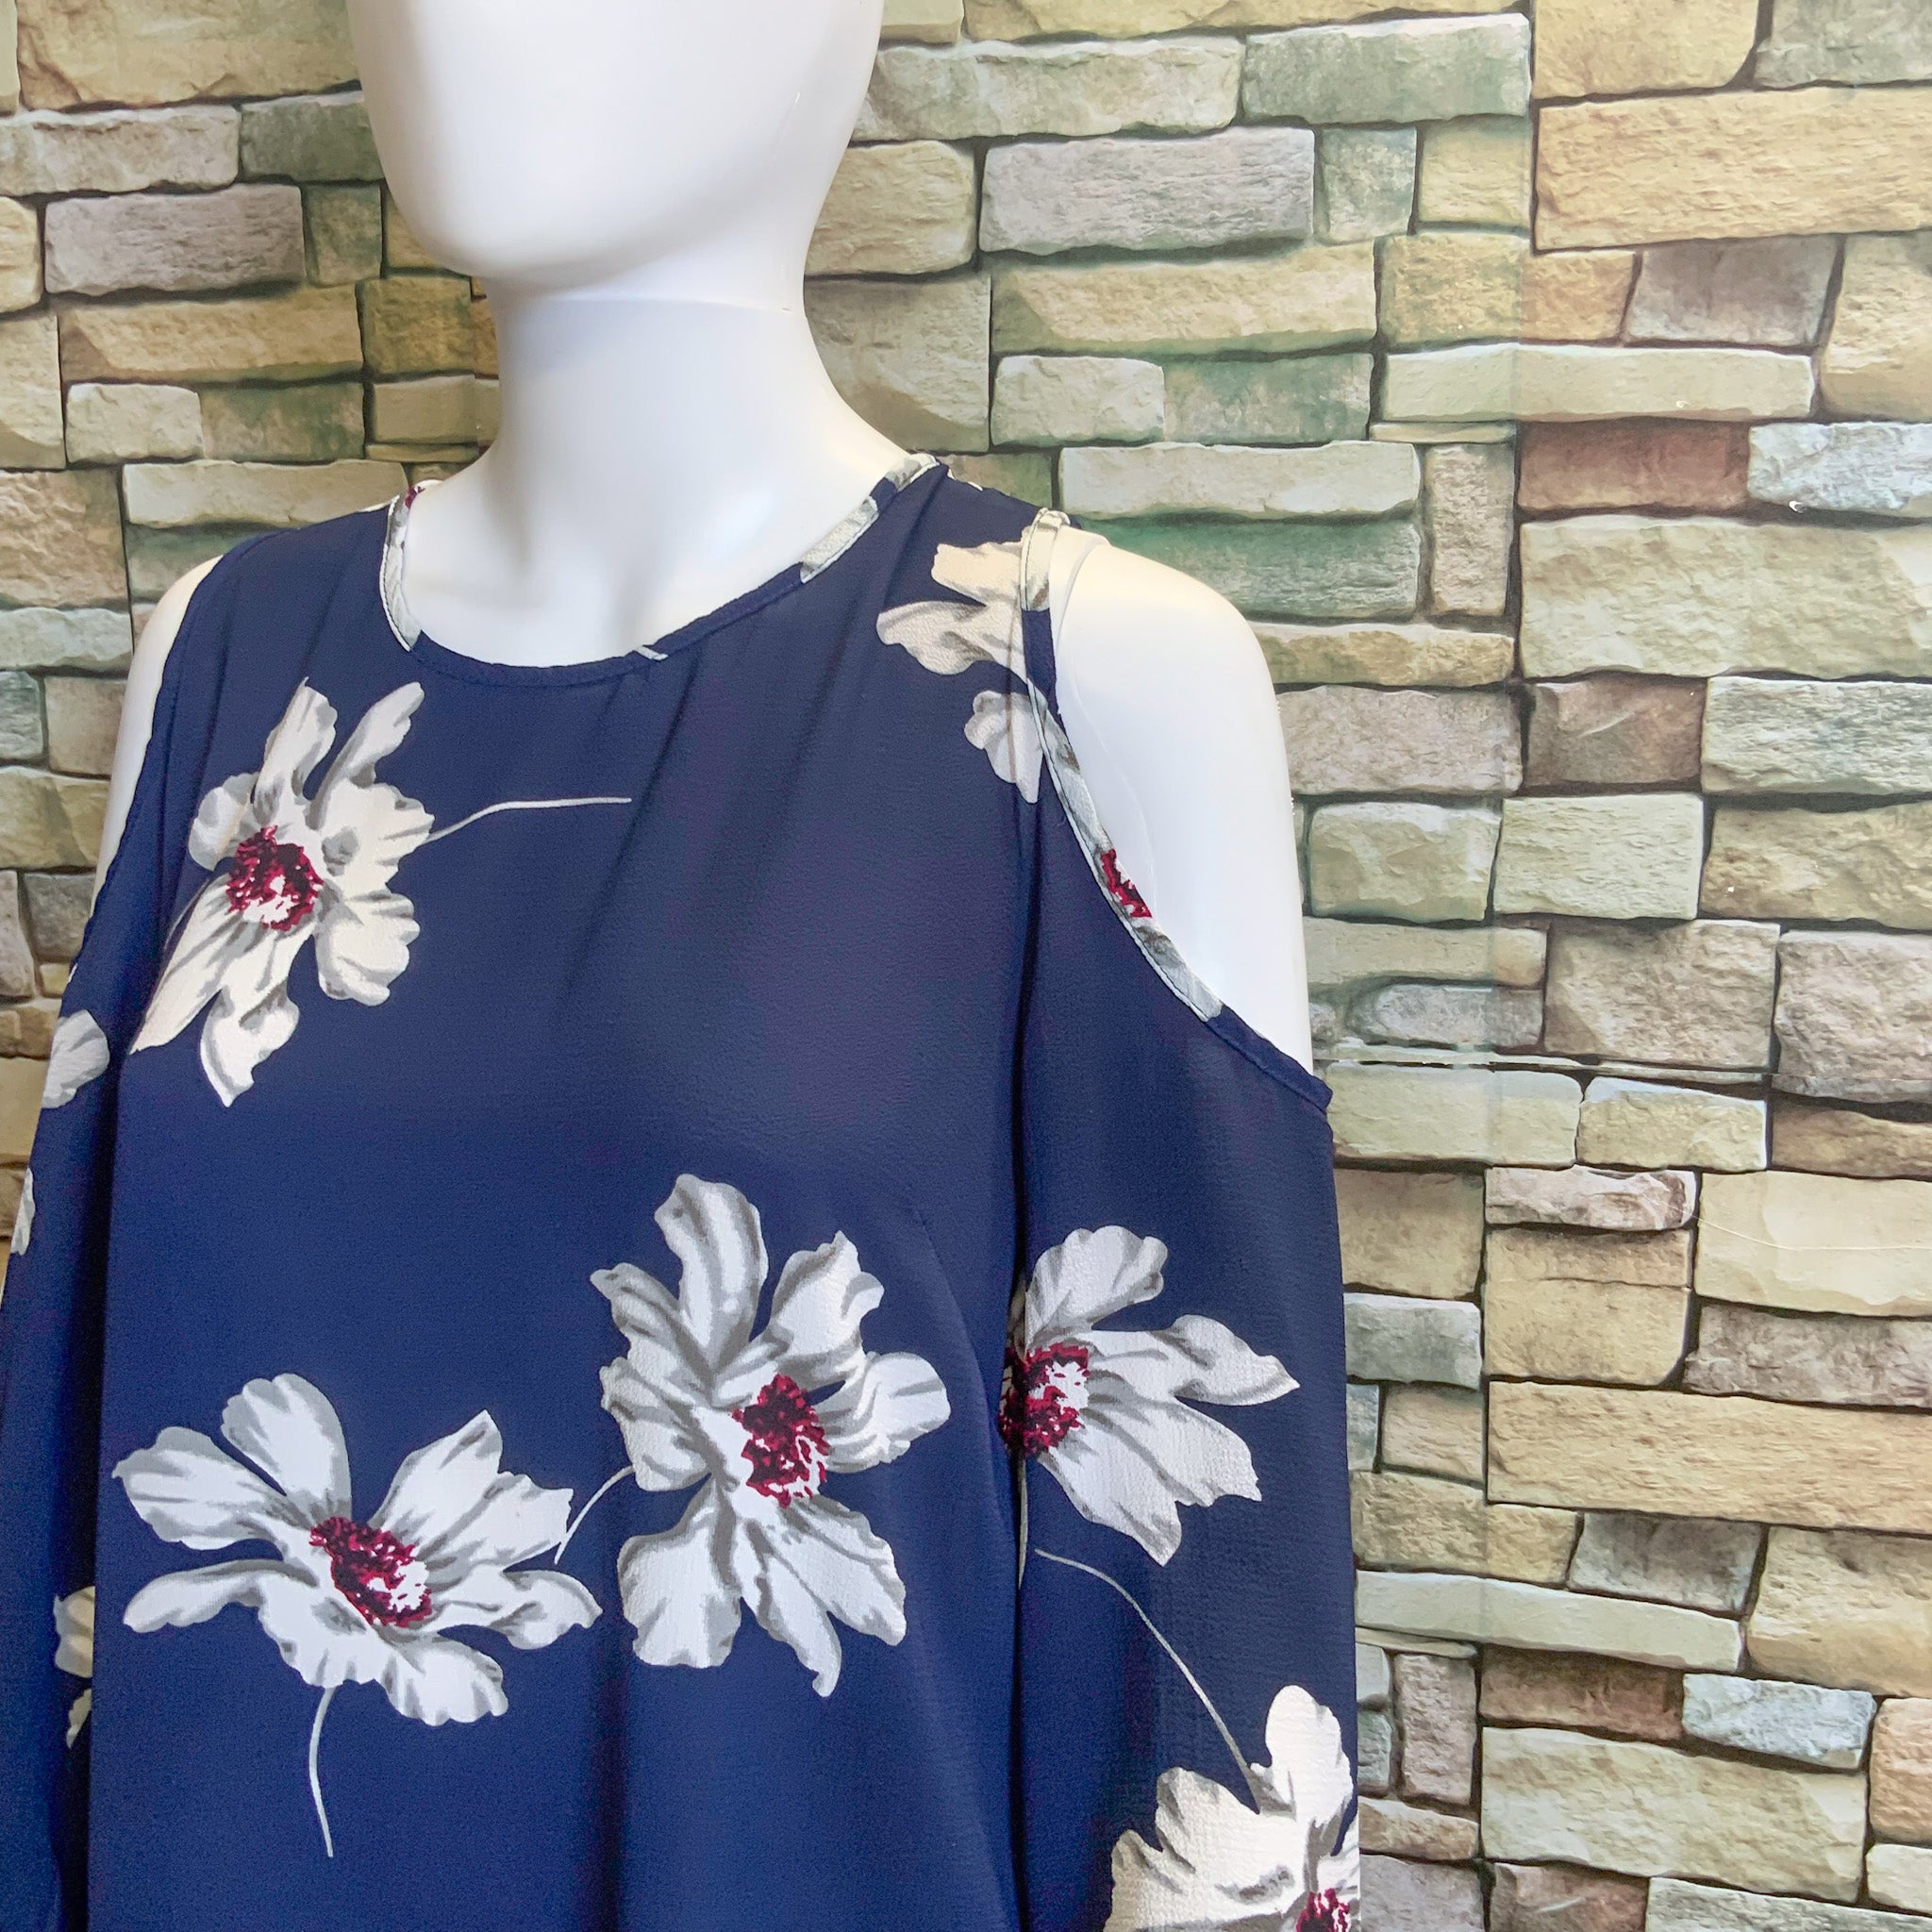 MIRACLE Blue Long Sleeved Floral Cold Shoulder Mini Dress - Size 8